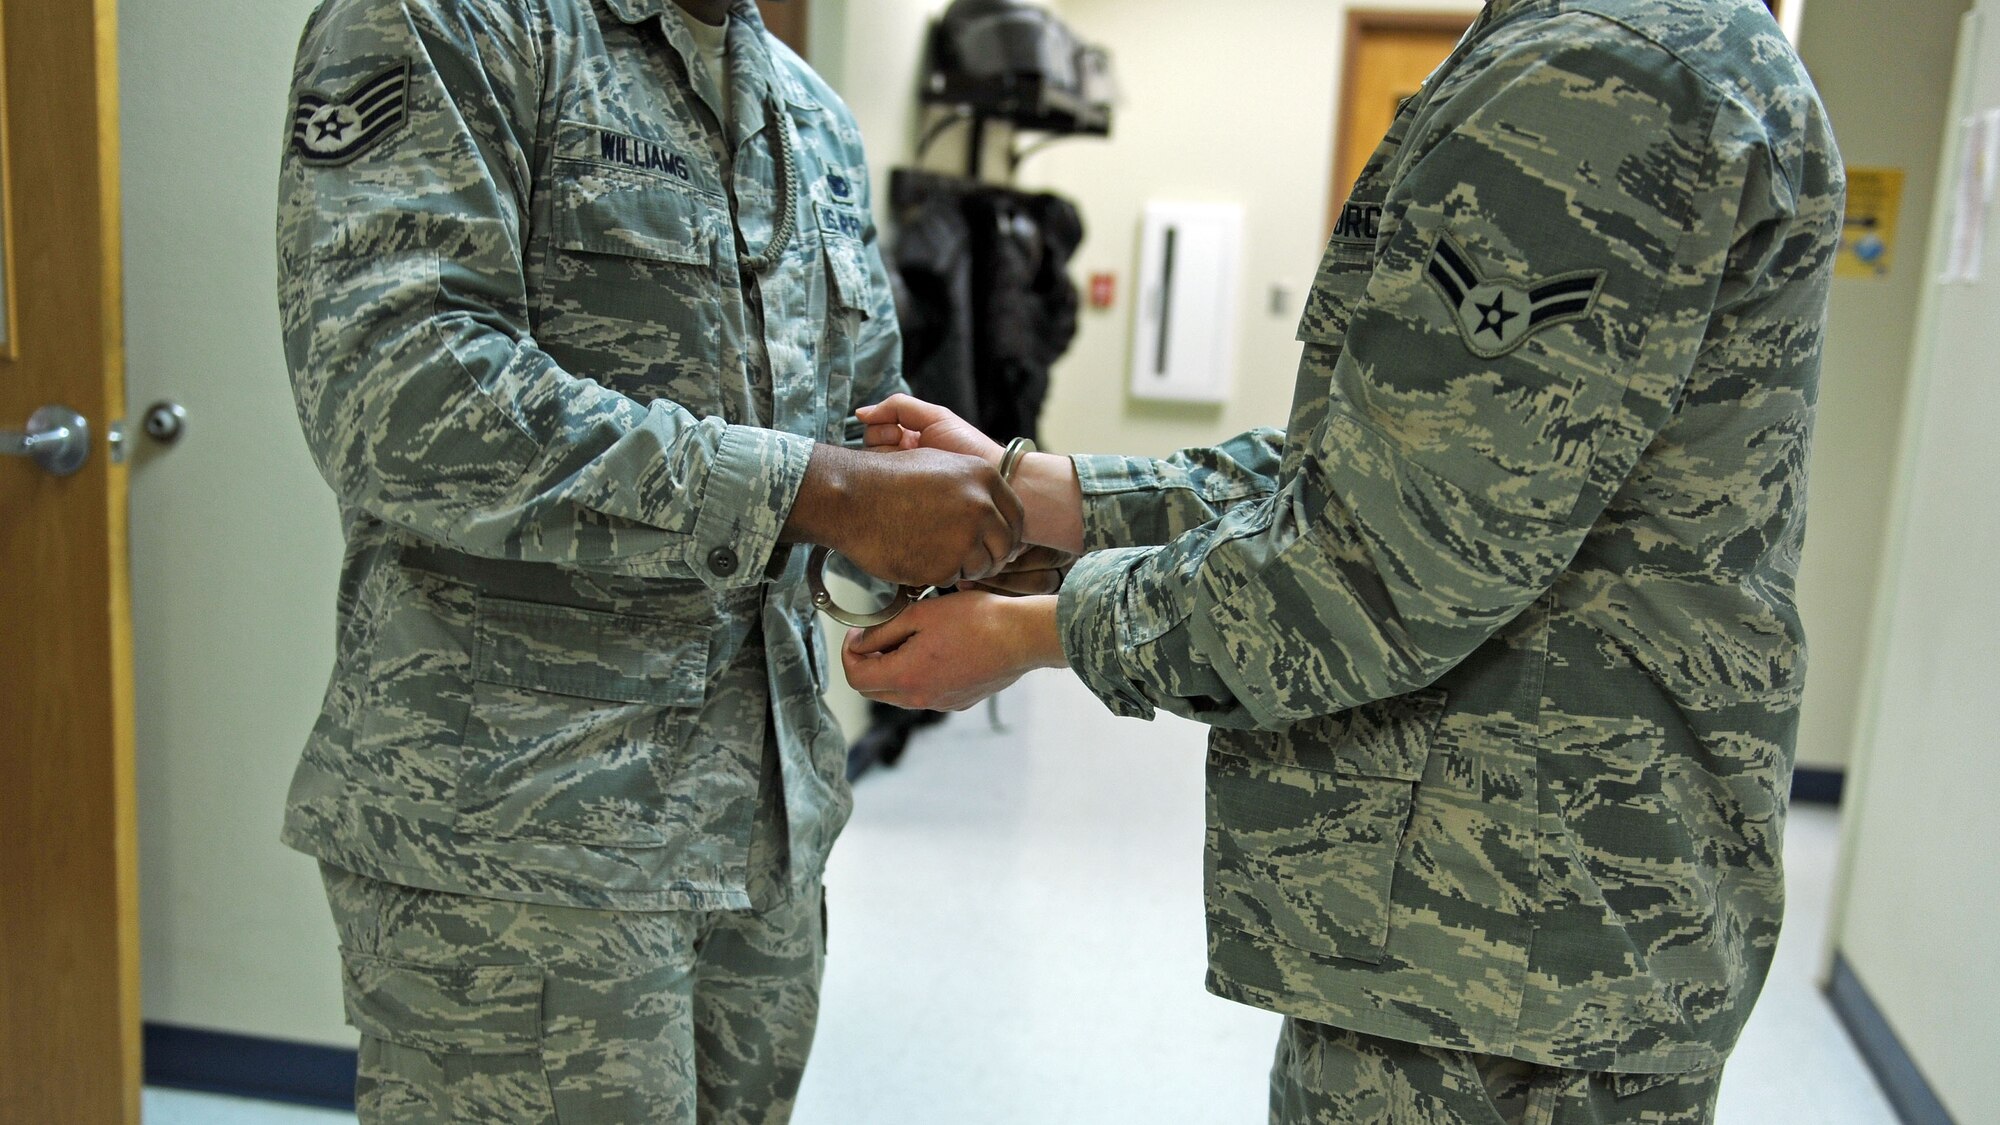 Staff Sgt. Ali Williams, 27th Special Operations Security Forces Squadron confinement NCO in-charge, simulates handcuffing an inmate at the 27th SOSFS compound April 13, 2016, at Cannon Air Force Base, N.M. When convicted of a court martial for infractions against the punitive articles of the Uniform Code of Military Justice or when placed in pre-trial confinement, members are transported to the confinement section until their sentence is served or they are found innocent of charges. (U.S. Air Force photo/Staff Sgt. Whitney Amstutz)